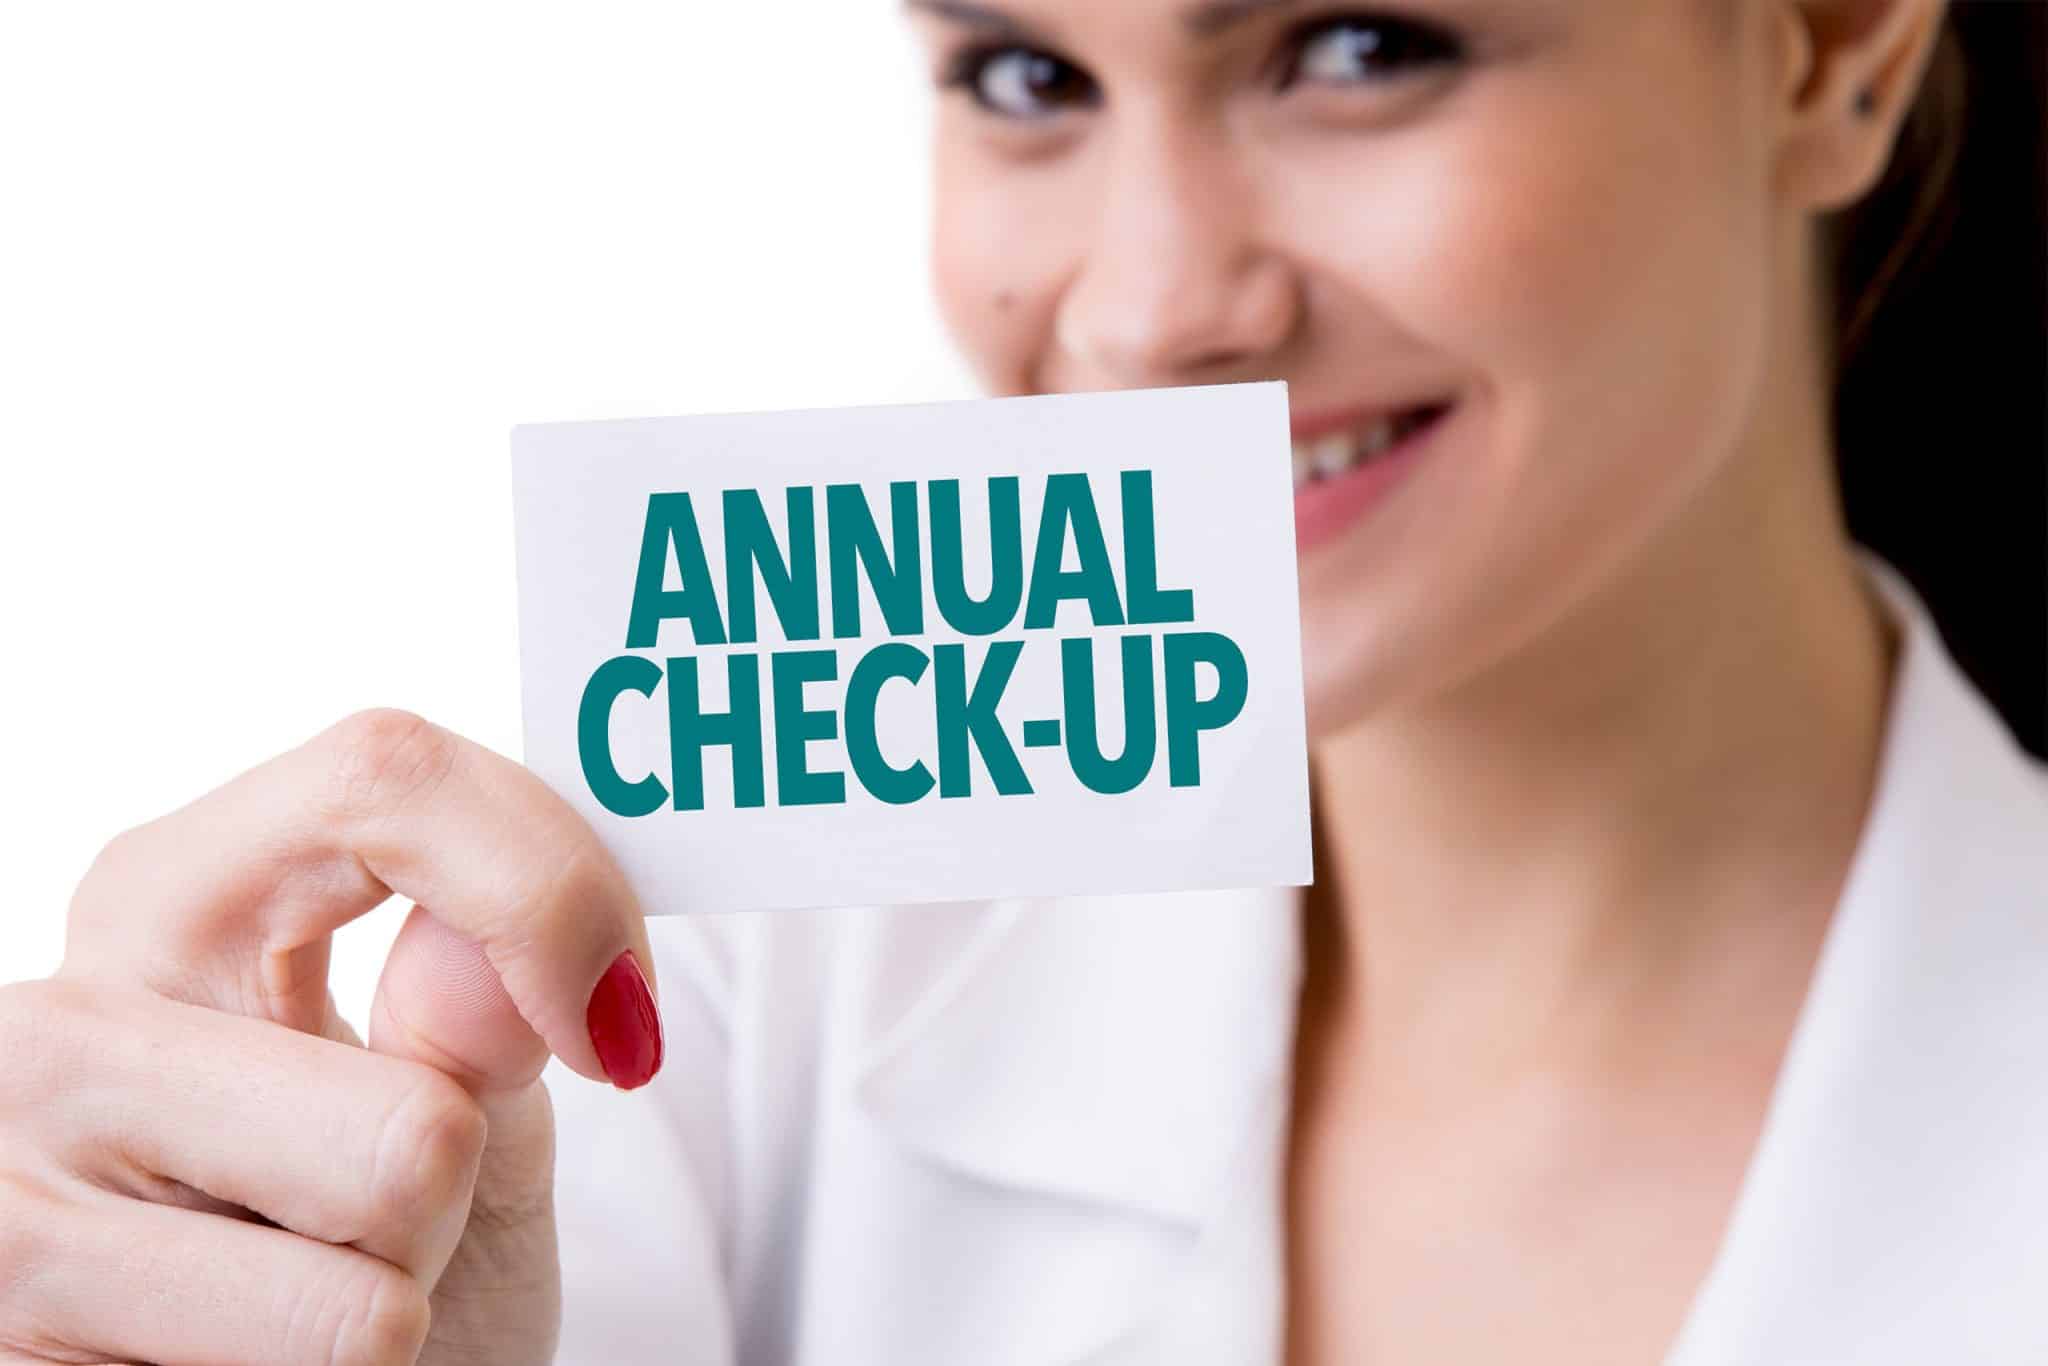 A woman holding up a card that says annual check-up.